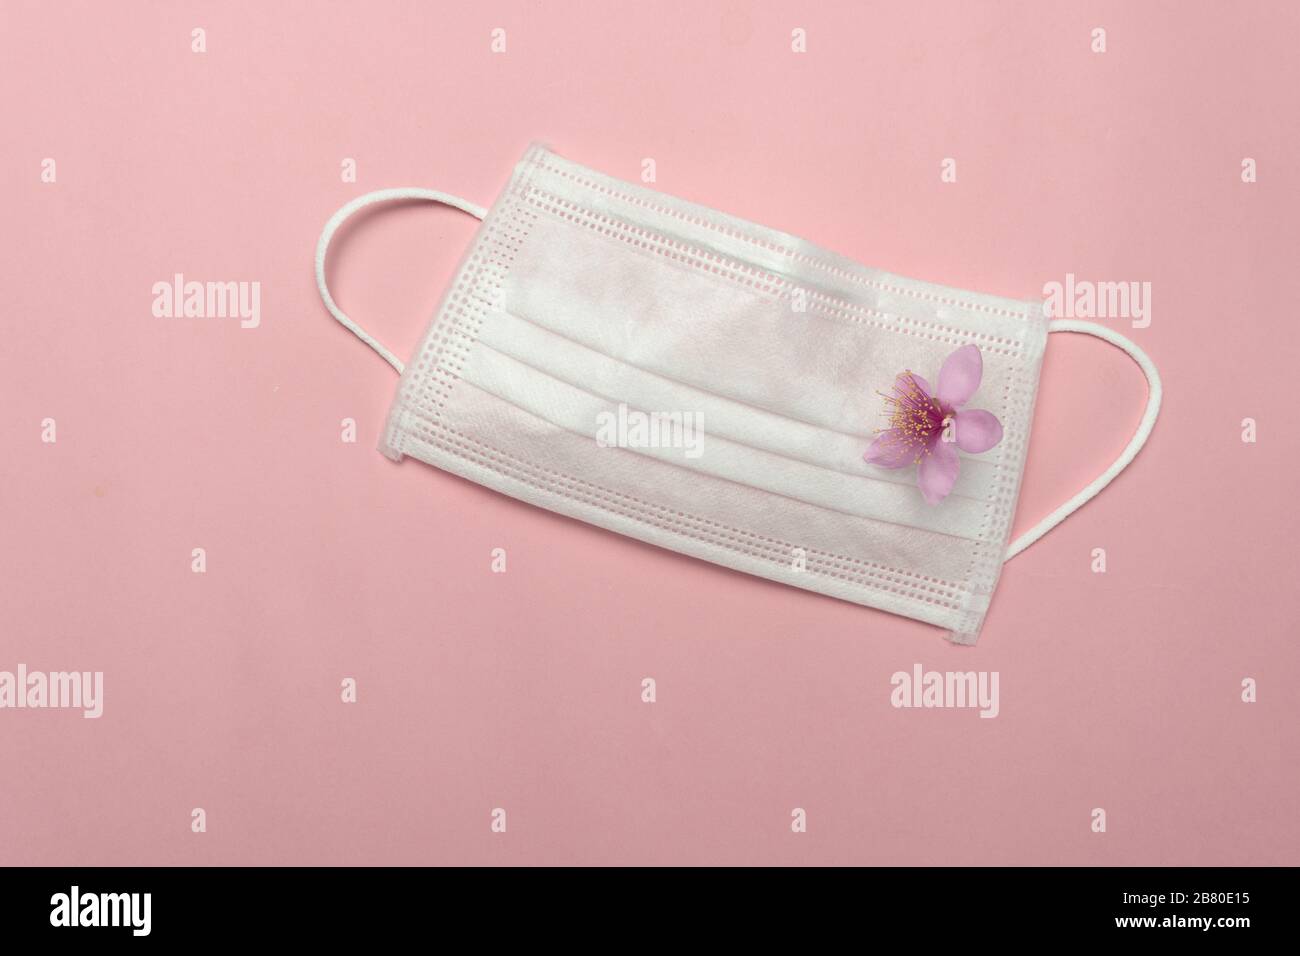 white health protective mask from corona virus or covid-19 disease with natural cute pink flower Stock Photo